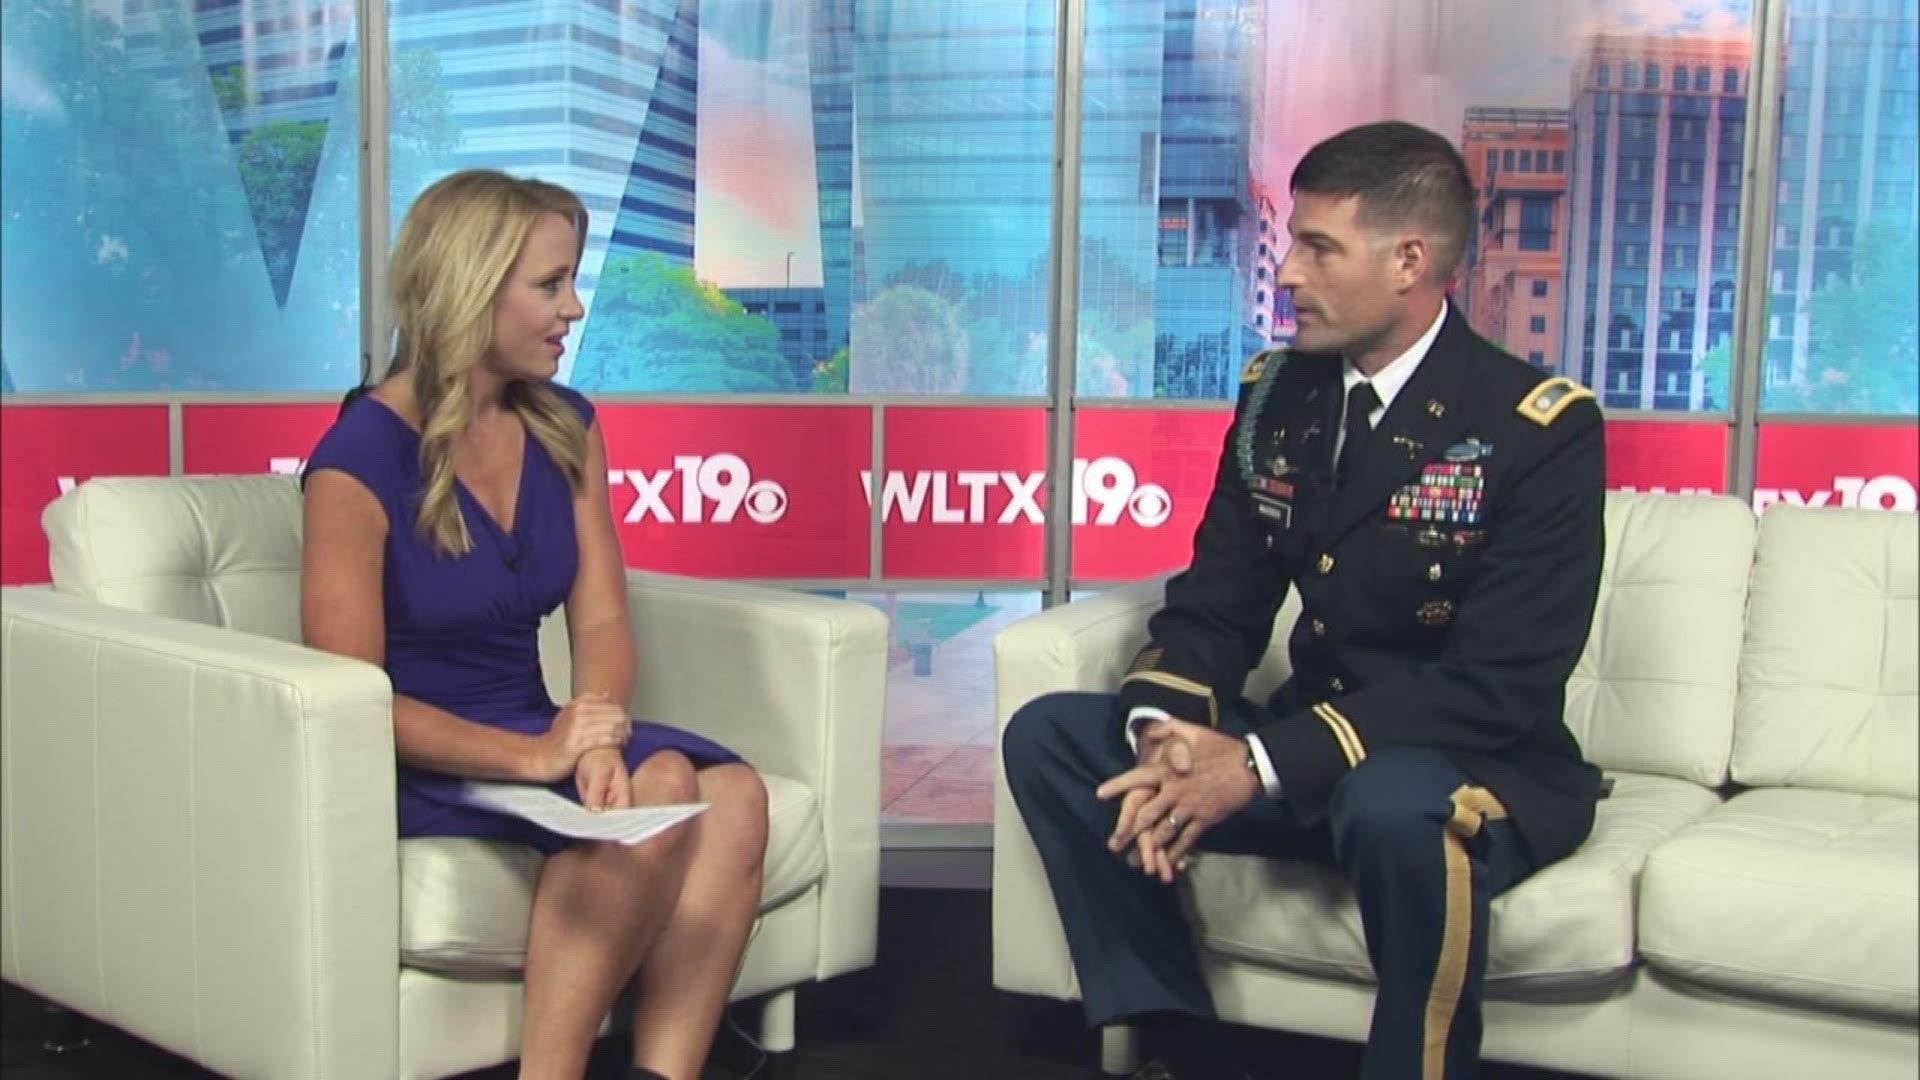 Fort Jackson Battalion Commander, Simon Macioch, stopped by to talk about how you can take an up-close tour of Ft. Jackson and "Come See Your Army!"